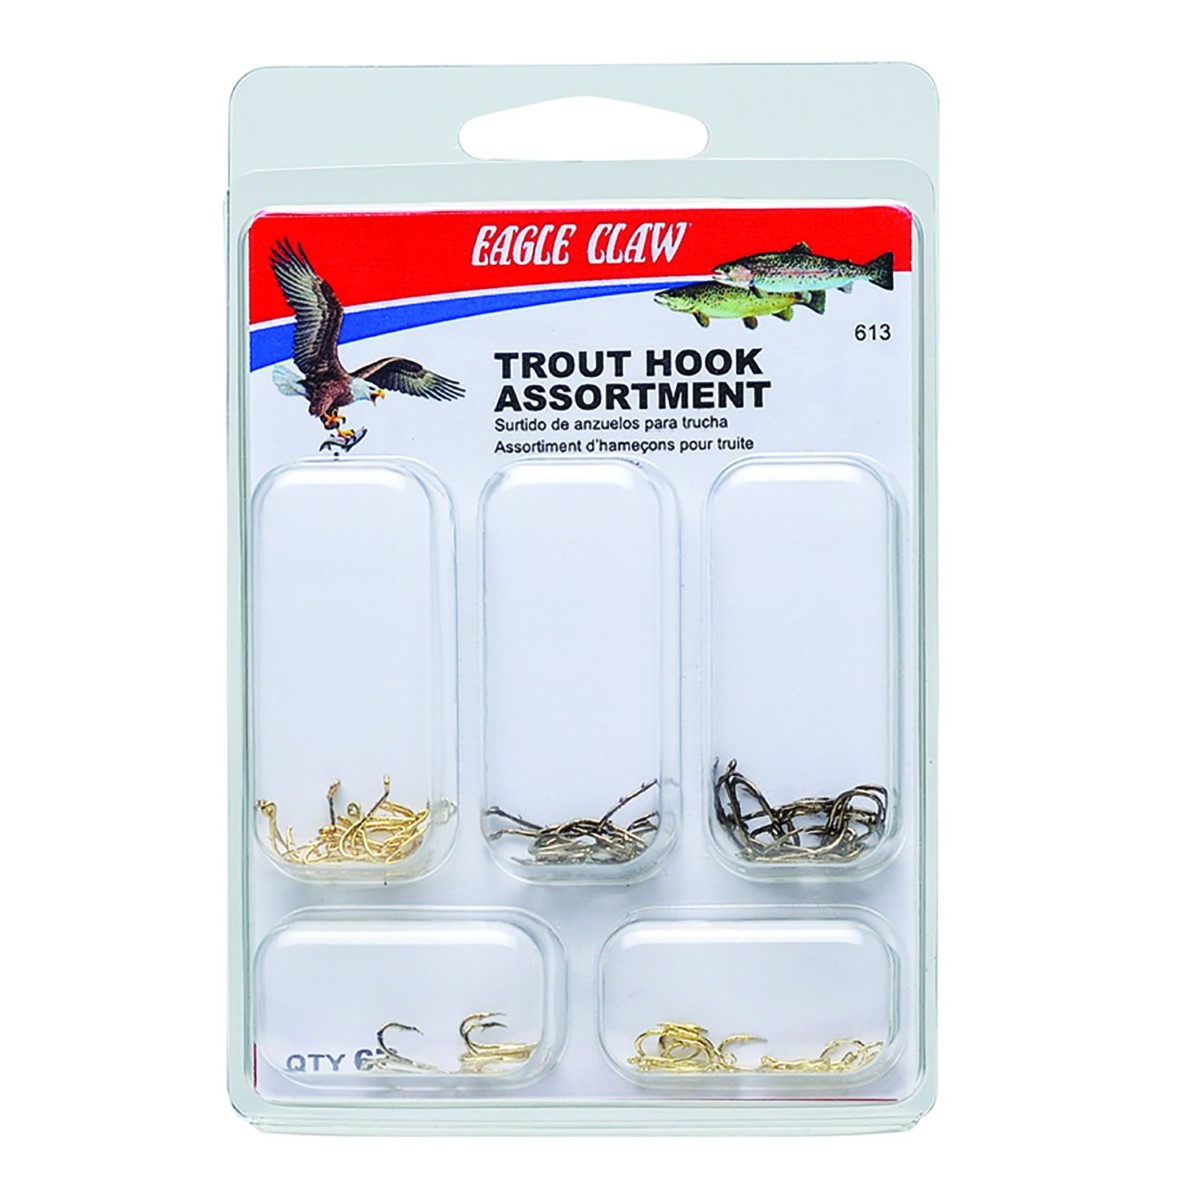 Eagle Claw Crappie/Bream Assortment Hooks